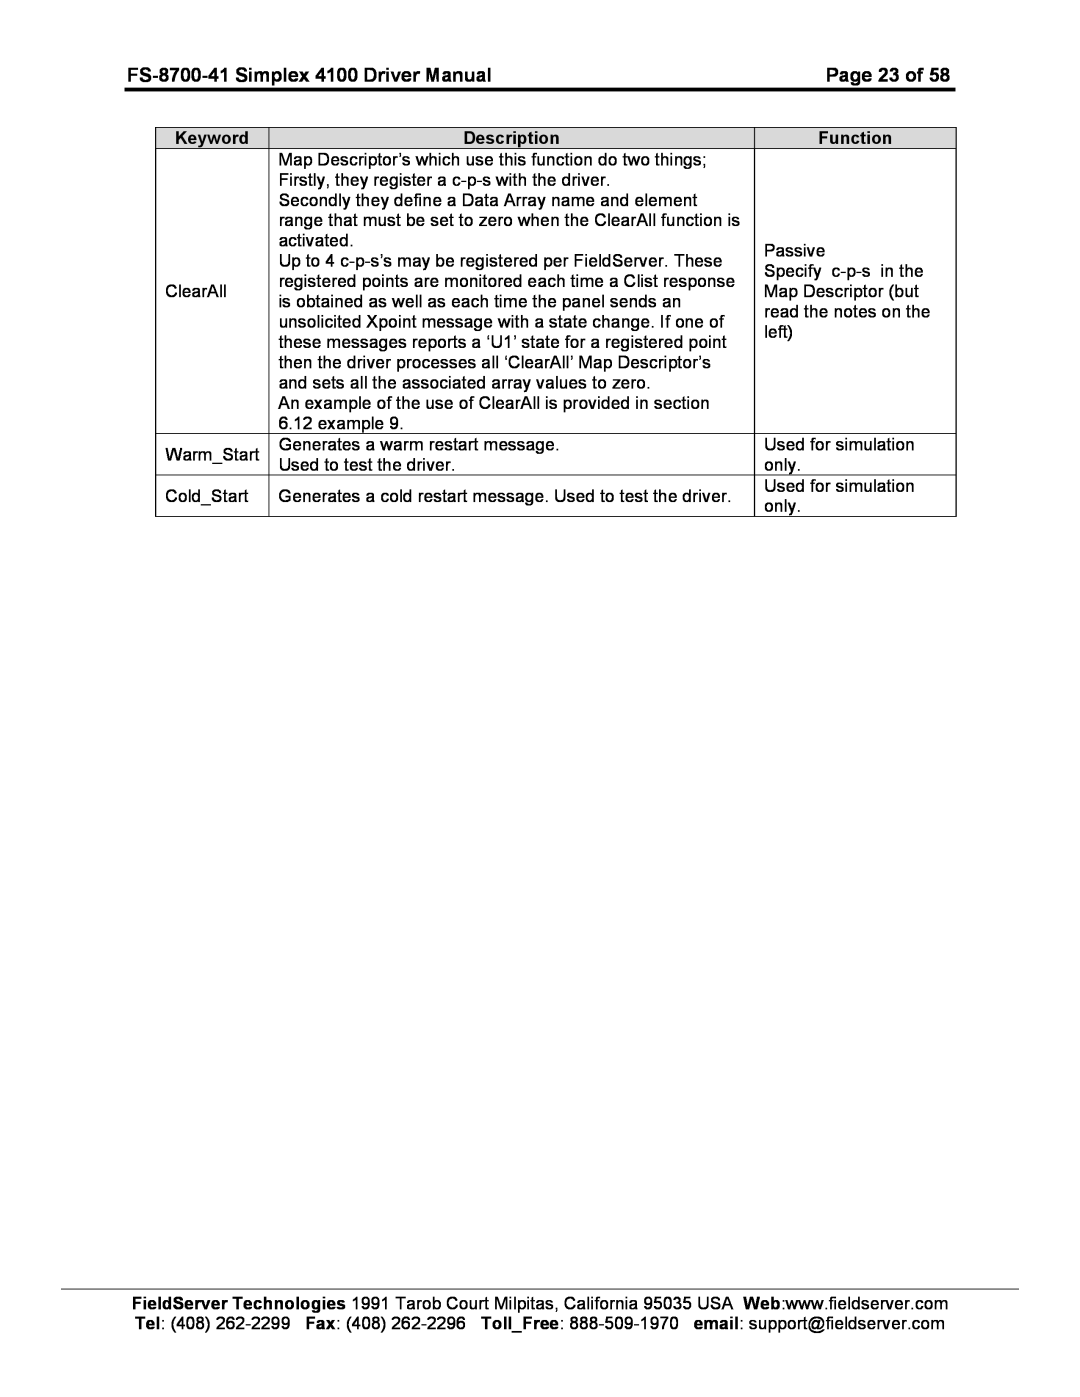 FieldServer instruction manual FS-8700-41 Simplex 4100 Driver Manual, Page 23 of 